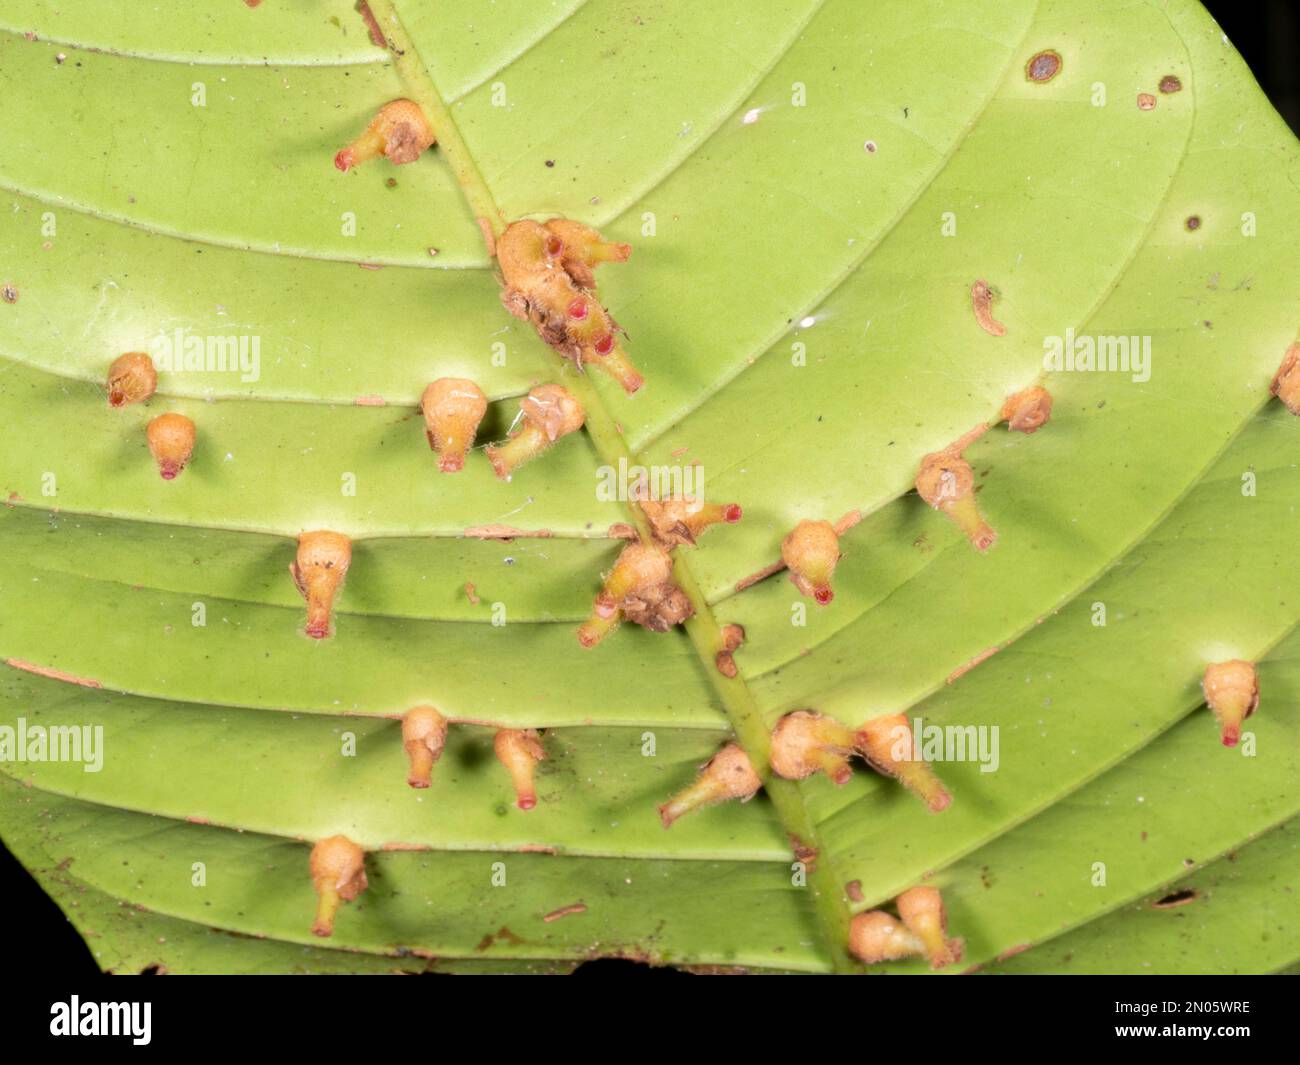 Leaf of an understory shrub covered in galls, resulting from insect, bacterial or fungal attack. Growing in rainforest in Orellana province, Ecuador Stock Photo